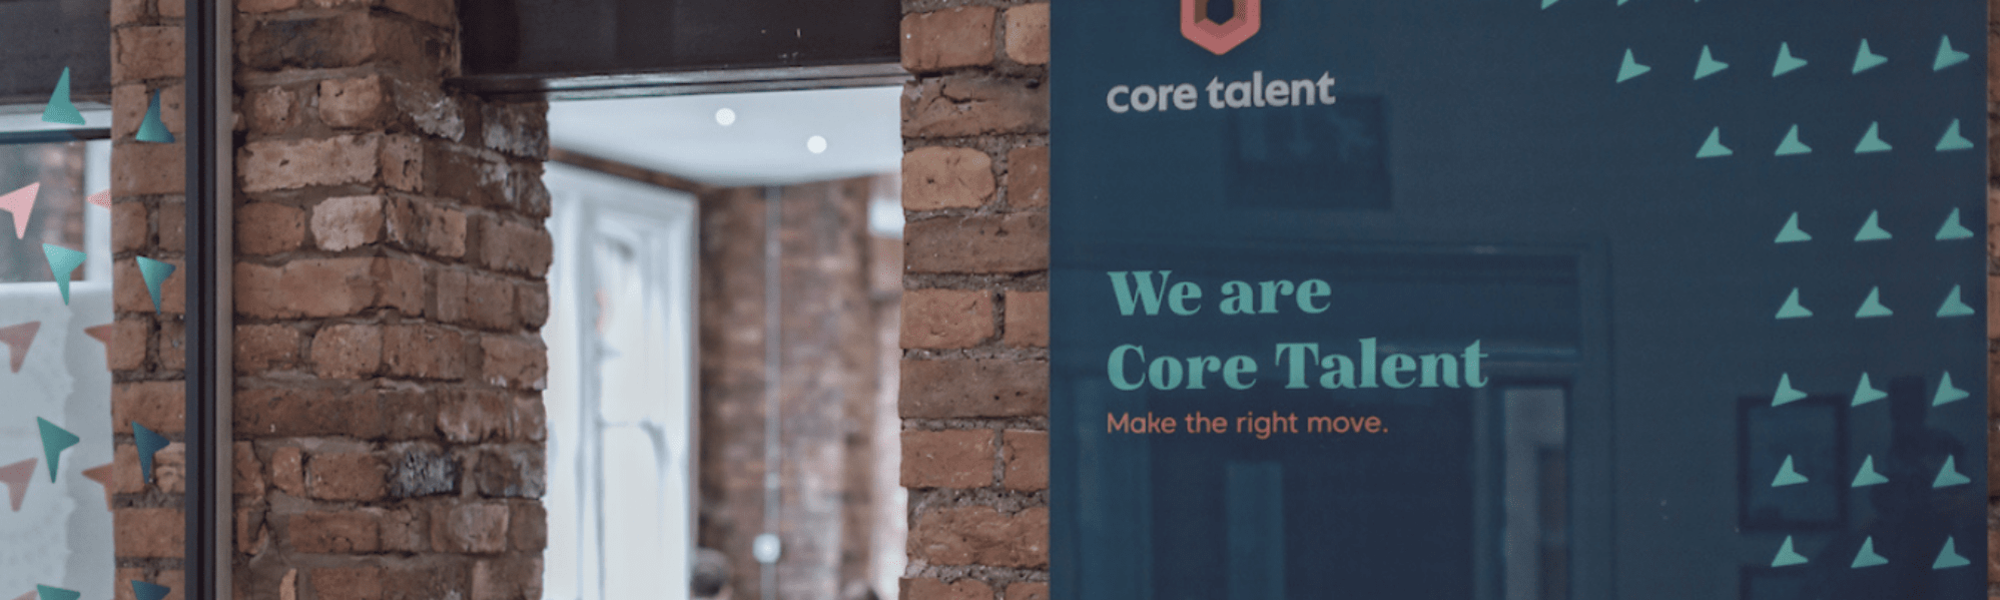 Core Talent Our people Say